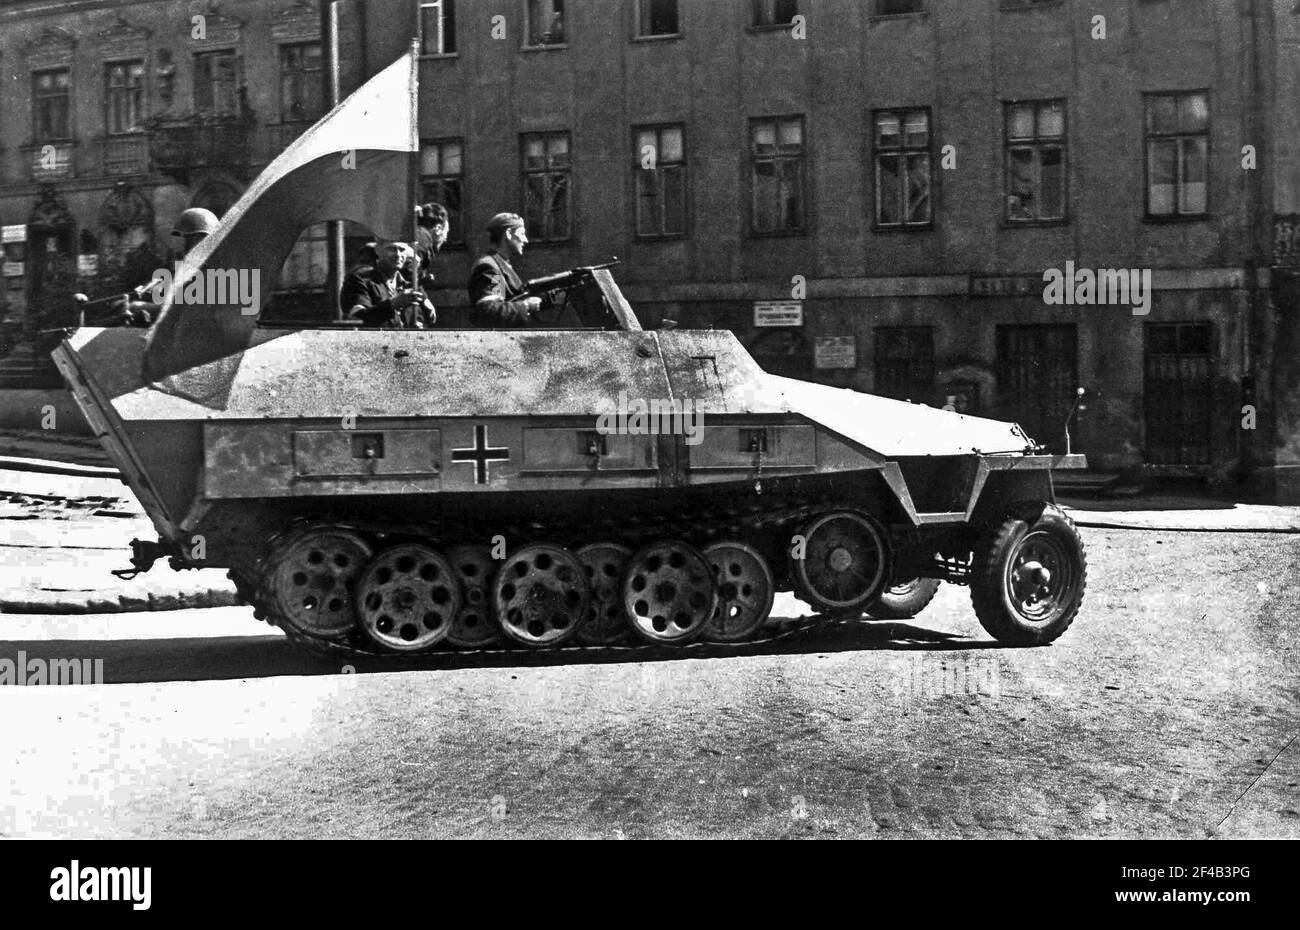 WarsawUprising: German armored fighting vehicle SdKfz 251 captured by the Polish insurgents, from 8-th 'Krybar' Regiment, on Na Skarpie Boulevard on August 14, 1944 from 5th SS 'Viking' division. In this picture taken on Tamka Street, soldier with MP-40 submachine gun is his first insurgent commander Adam Dewicz 'Gray Wolf' Stock Photo